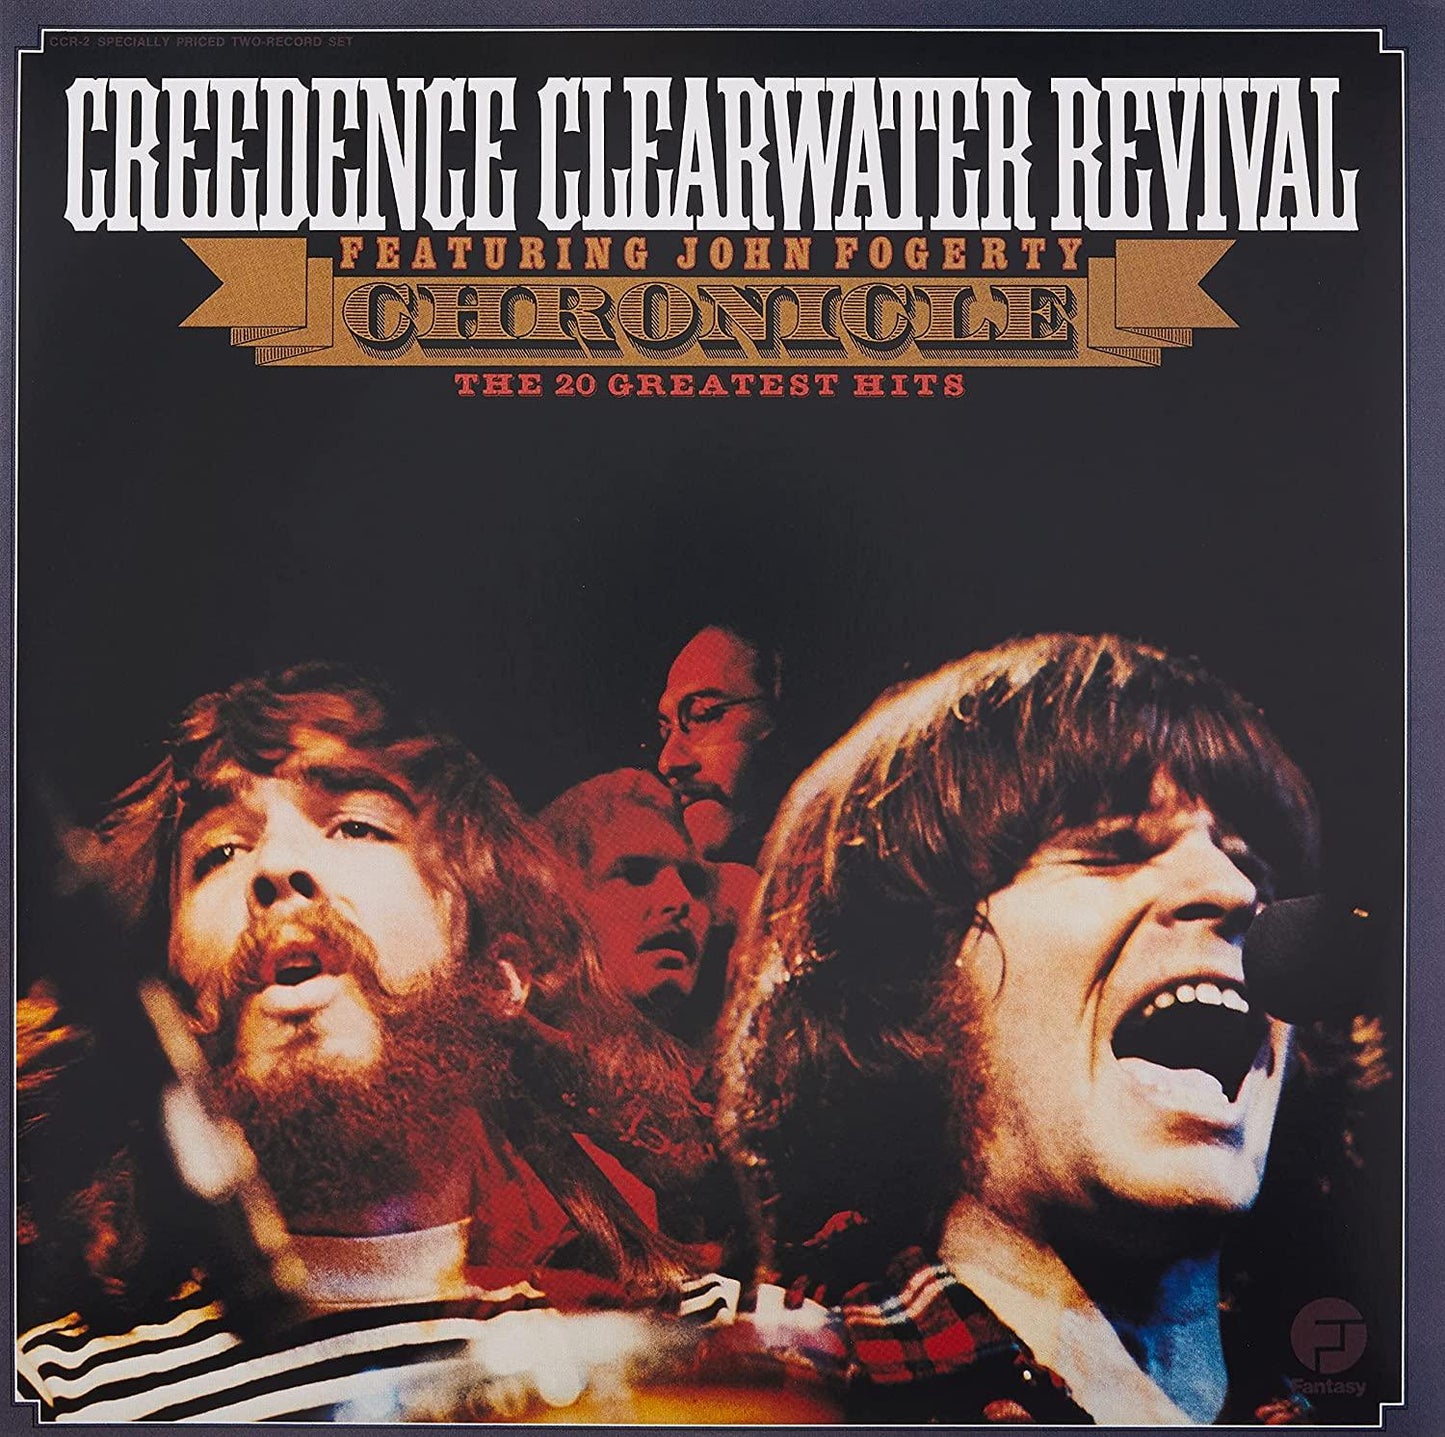 Creedence Clearwater Revival - Chronicle: The 20 Greatest Hits (2 LP) - Joco Records